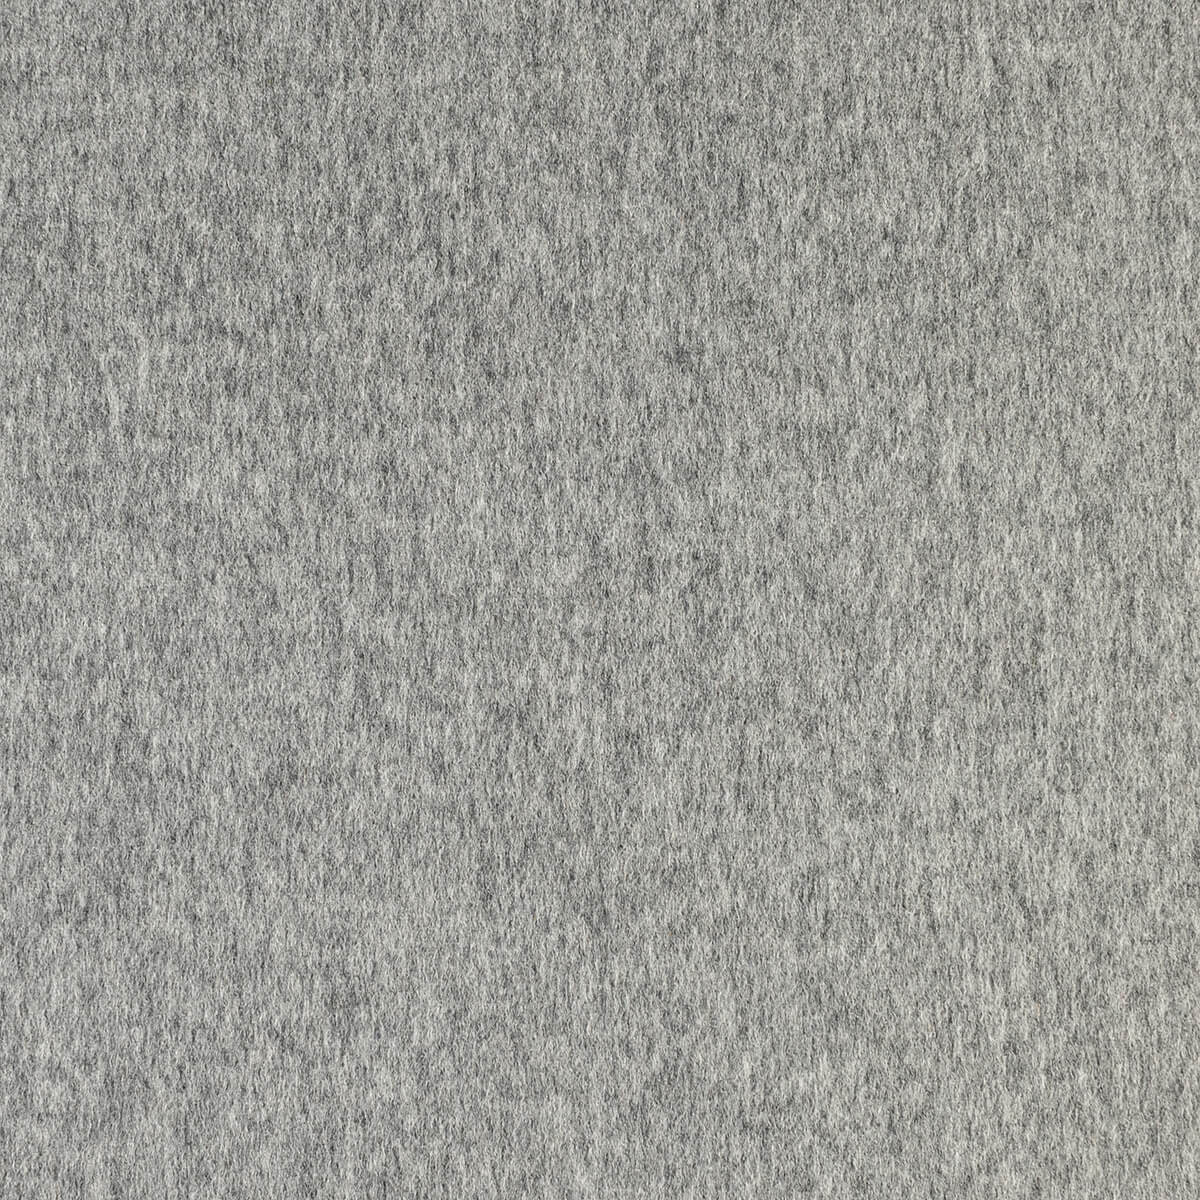 Swatch of Johnstons of Elgin Women's Cashmere Dressing Gown with Silk Lining in Light Grey on a grey background TA000473RU67840